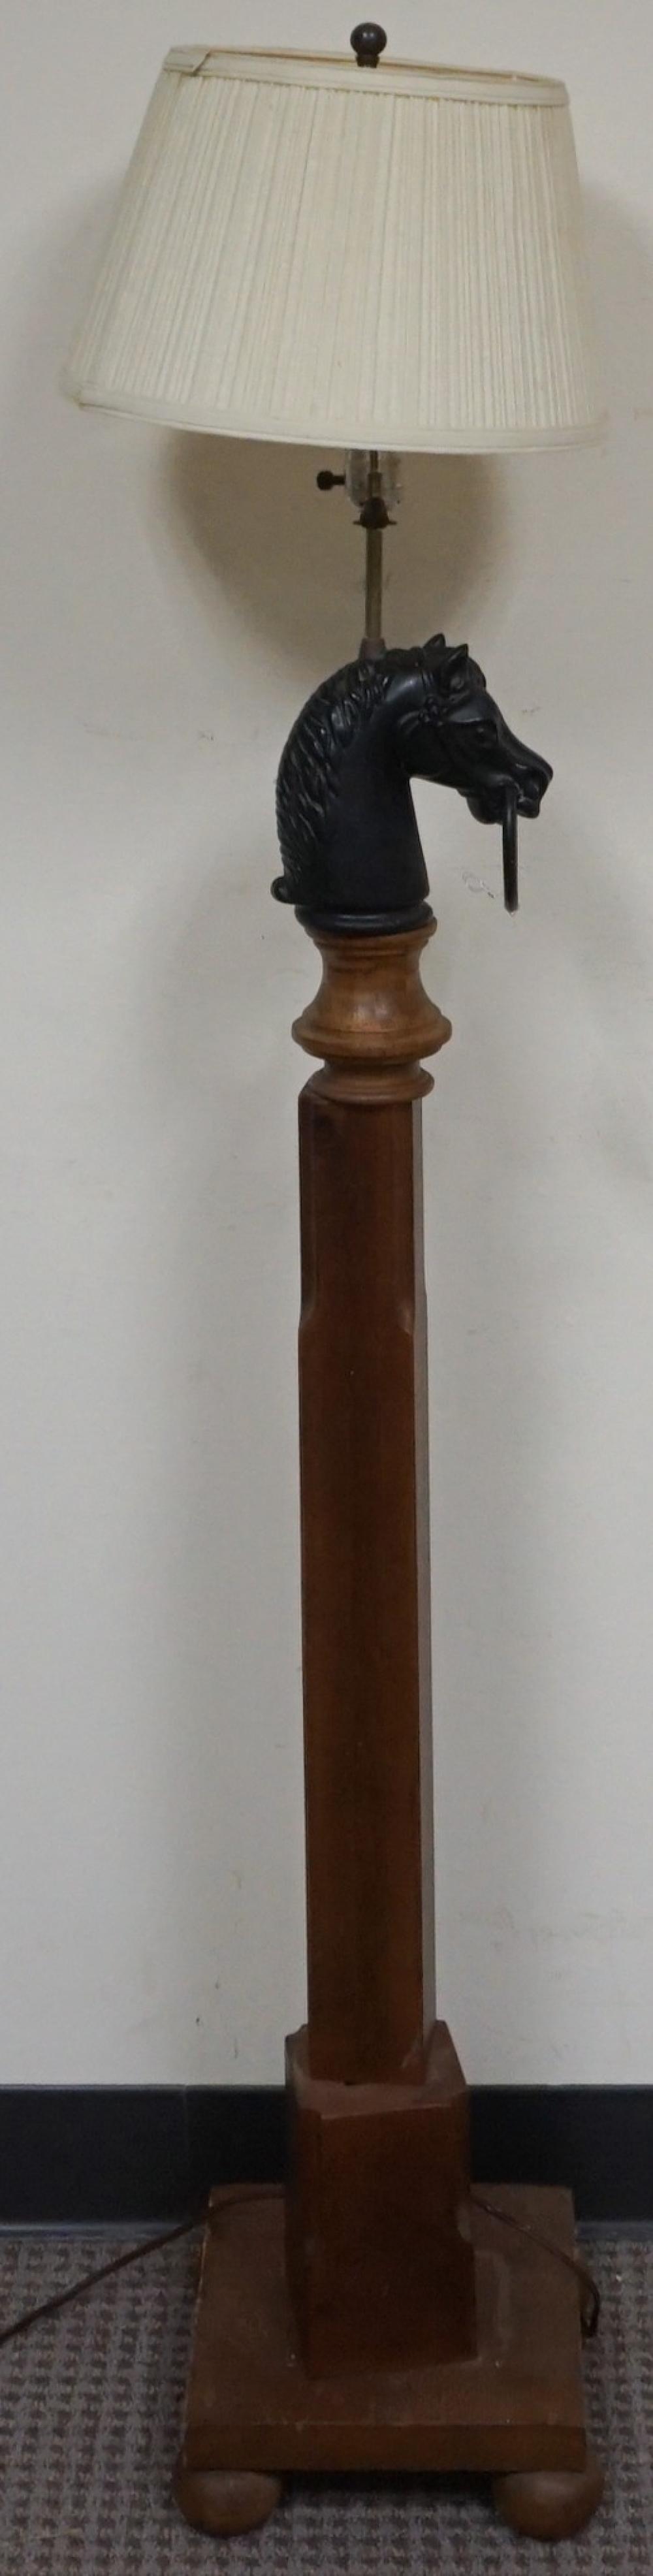 HITCHING POST FORM FLOOR LAMP  32e7ee